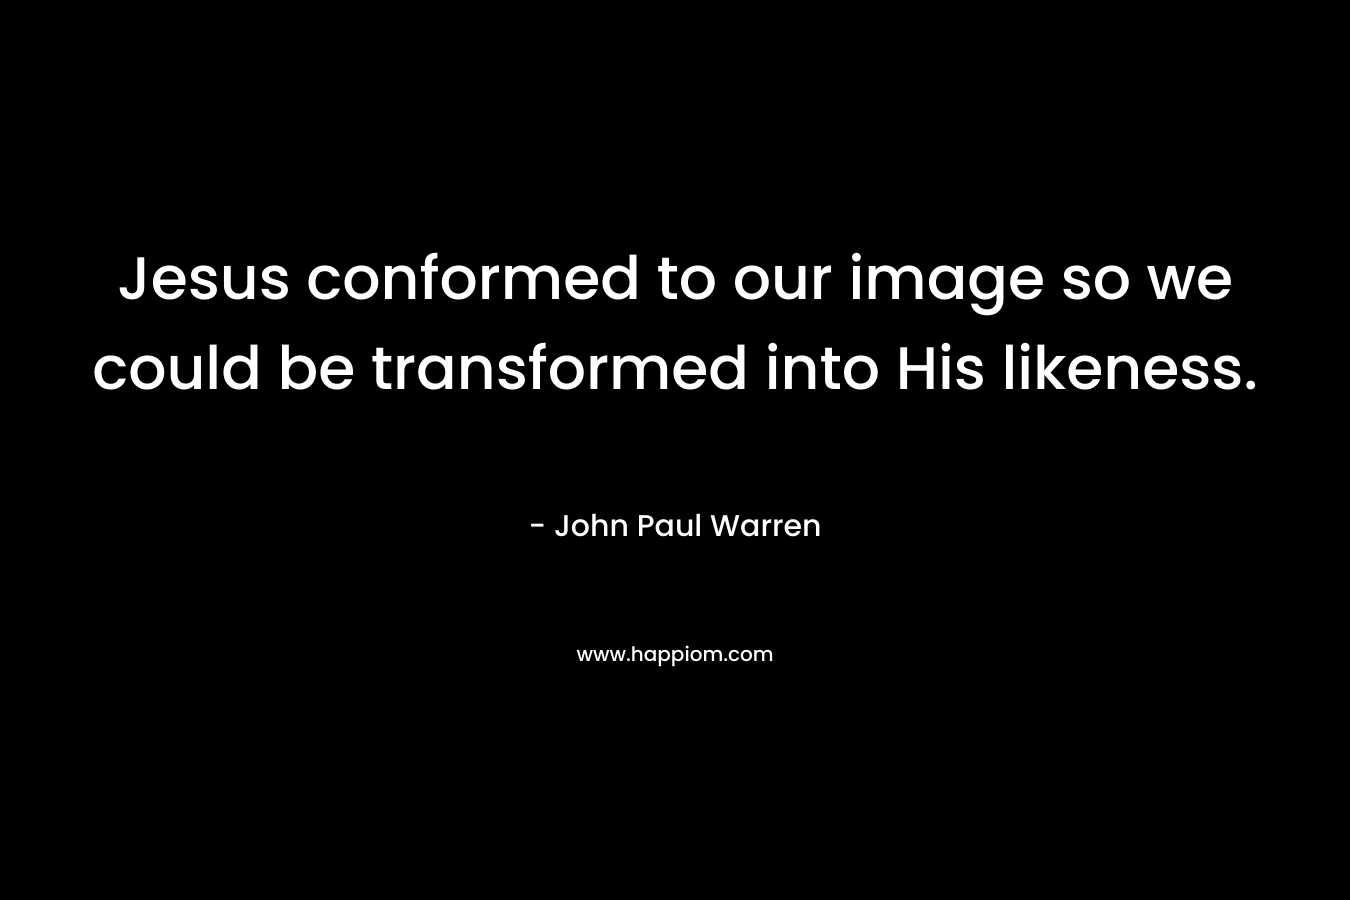 Jesus conformed to our image so we could be transformed into His likeness. – John Paul Warren